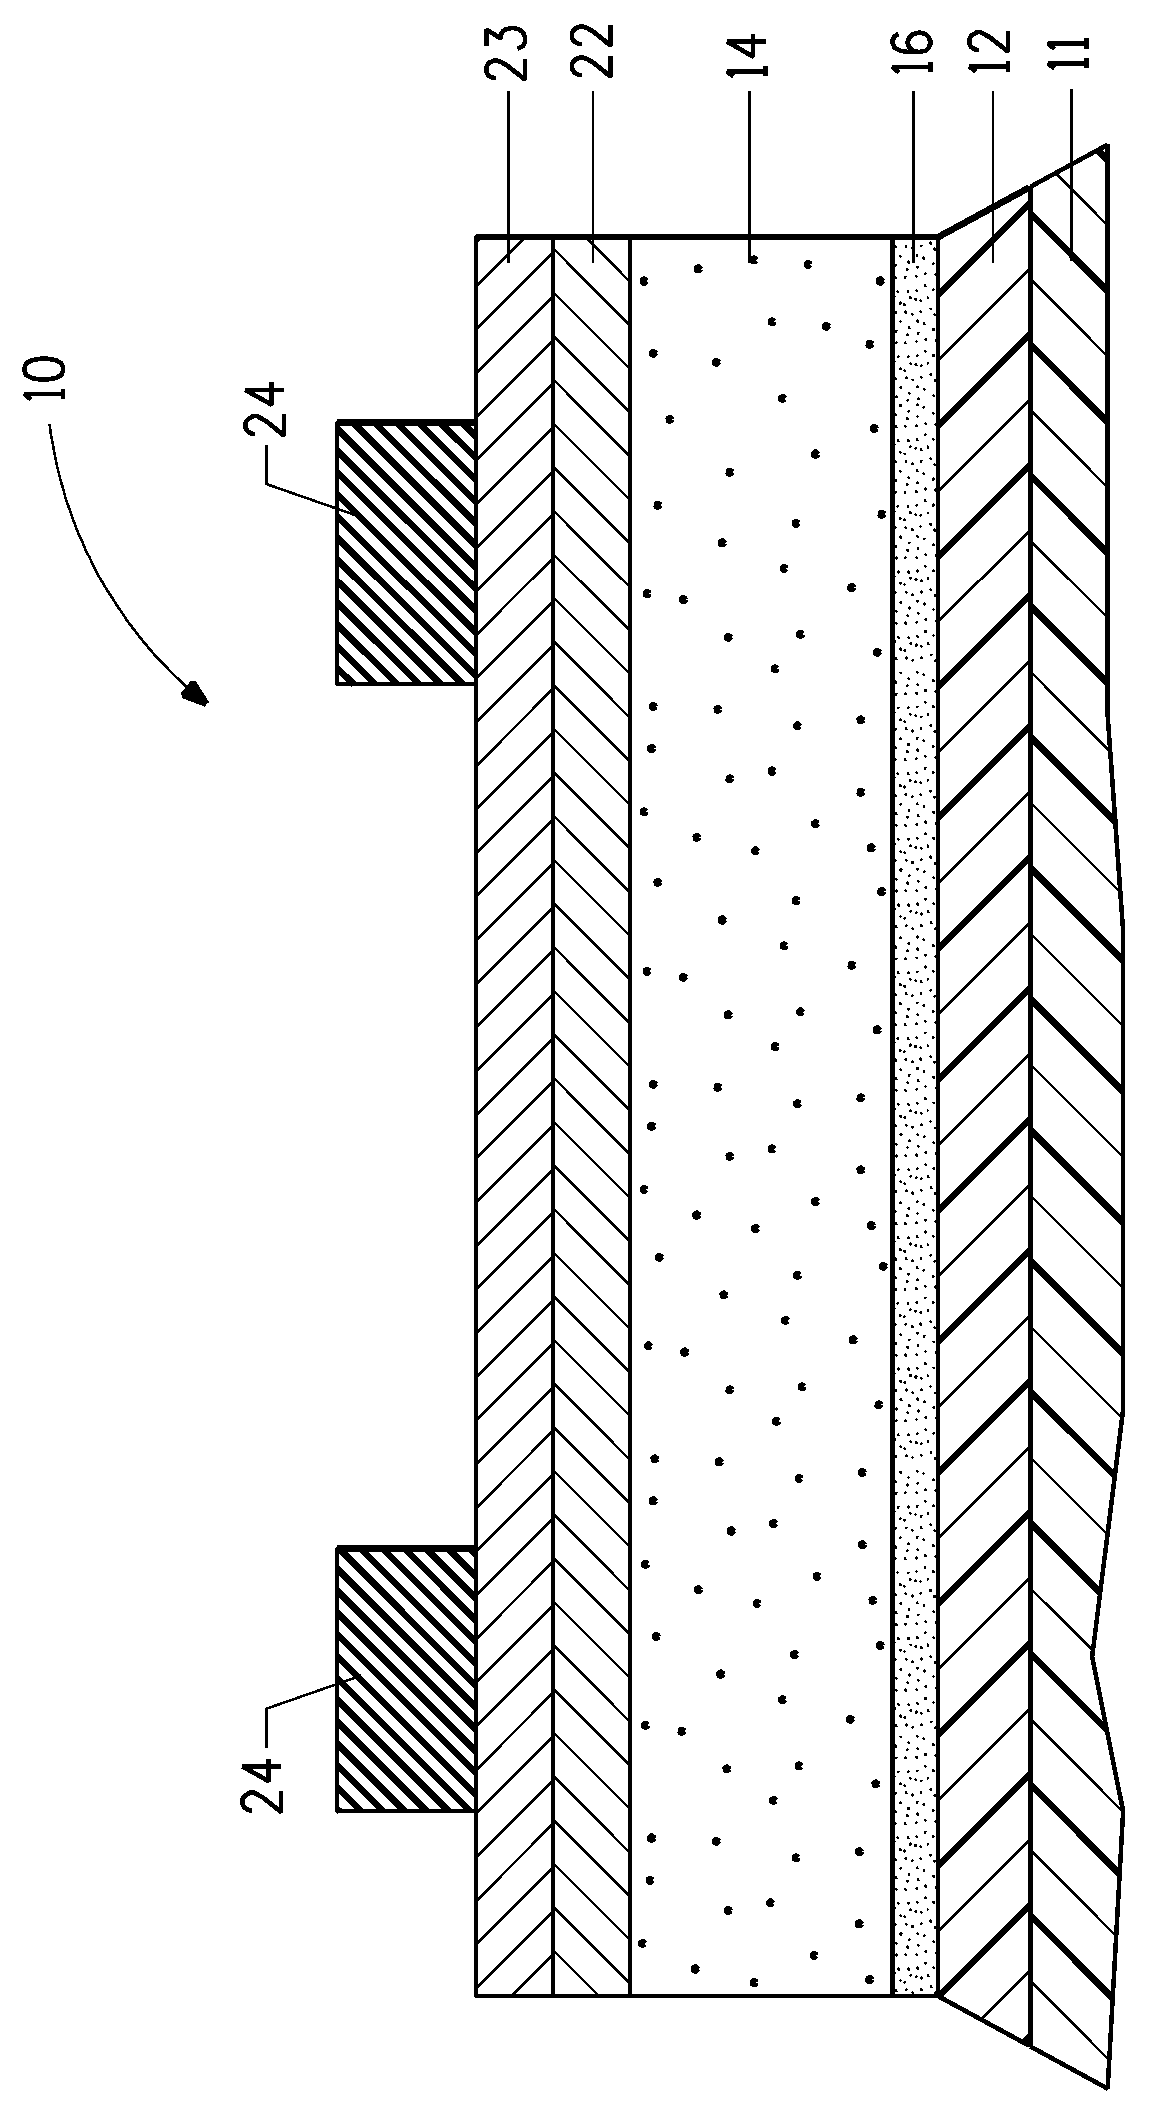 Laminate structures for high temperature photovoltaic applications, and methods relating thereto